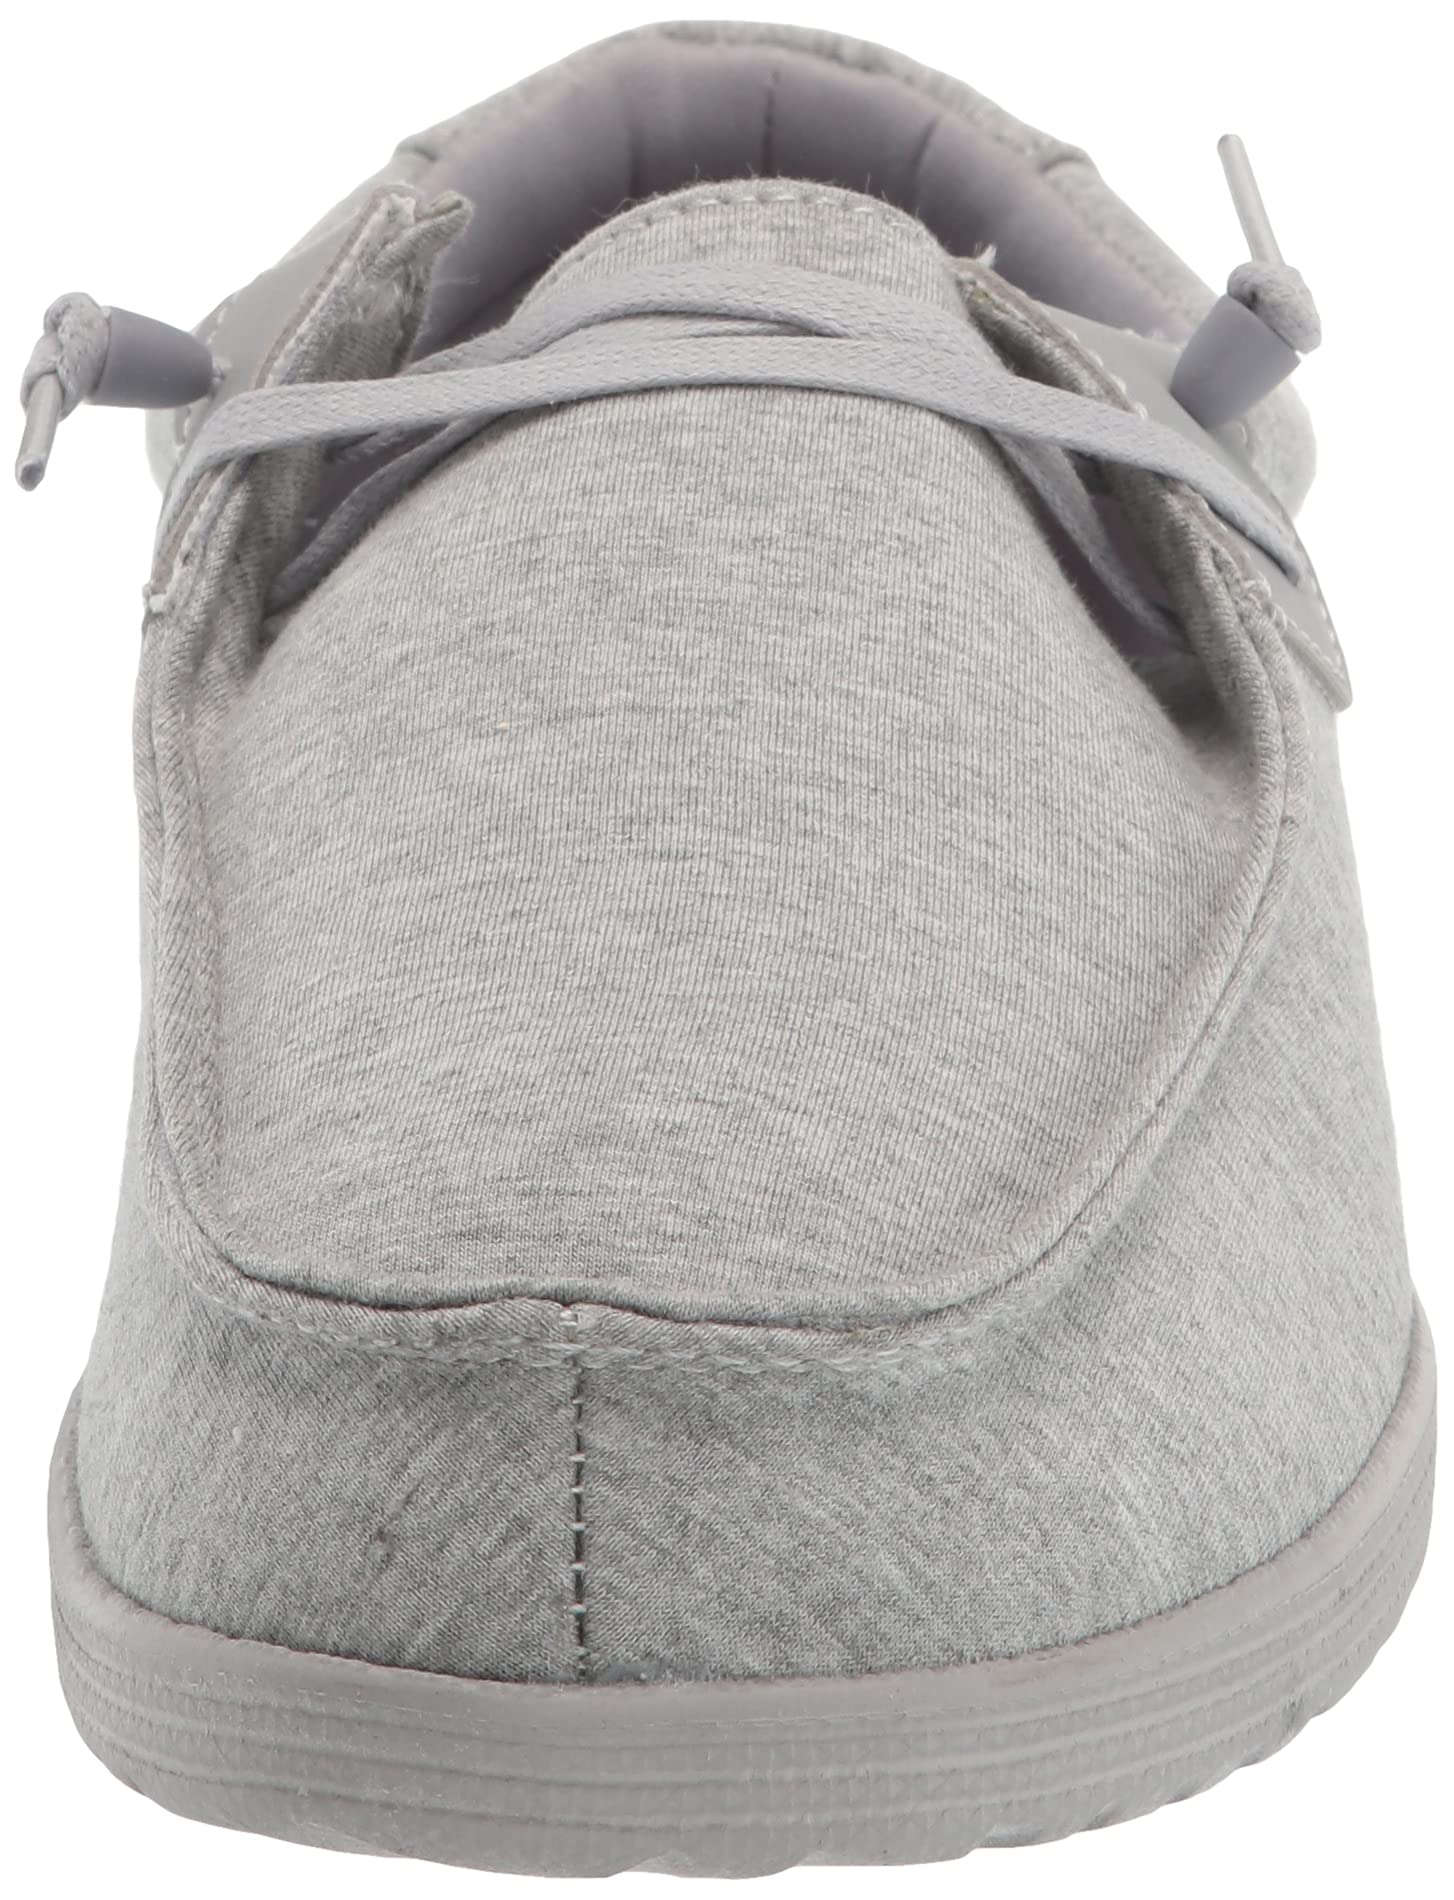 GBX Men's Bowery Canvas Slip-On Shoes